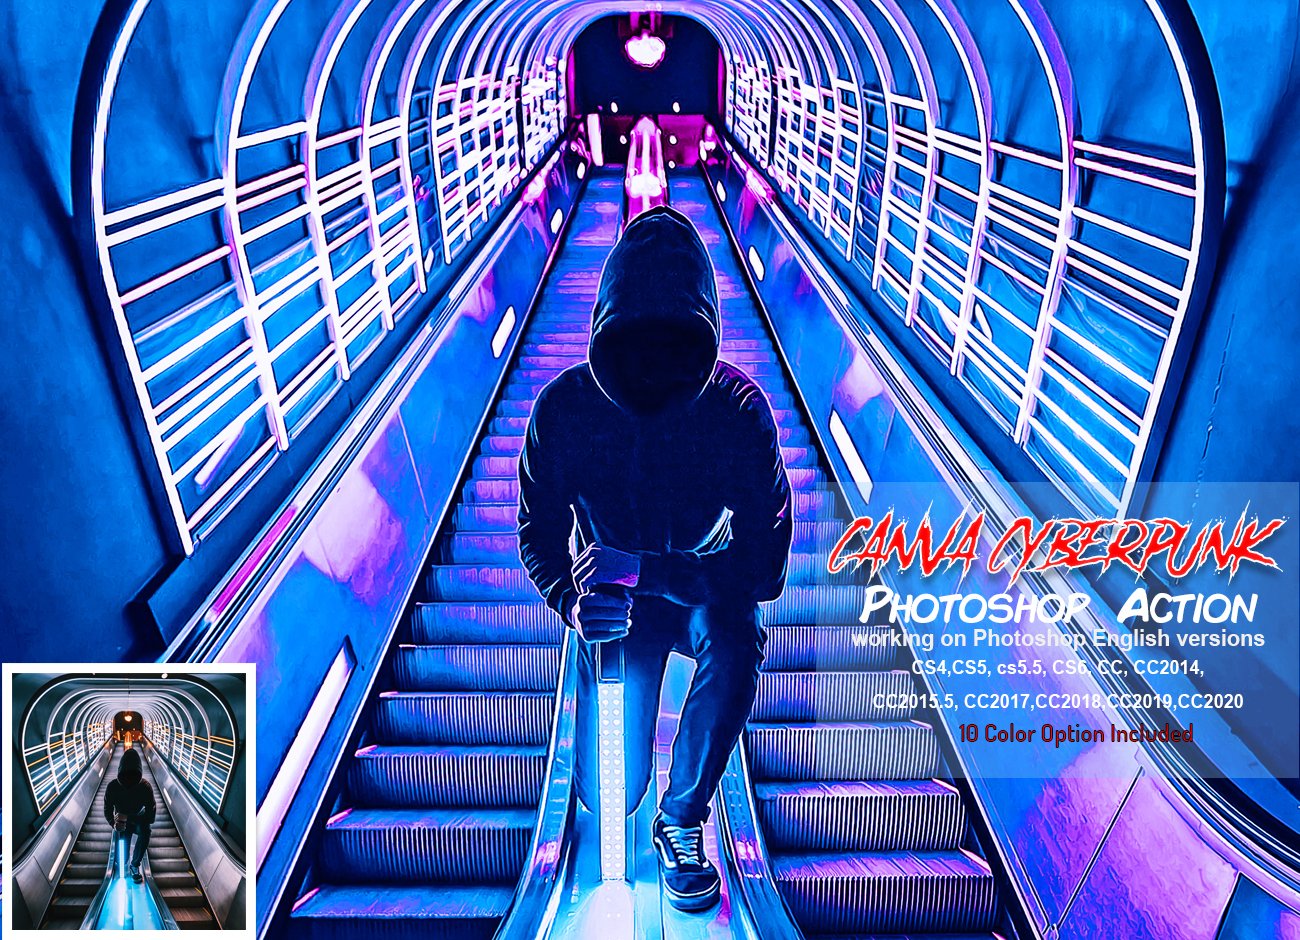 Canva Cyberpunk Photoshop Actioncover image.